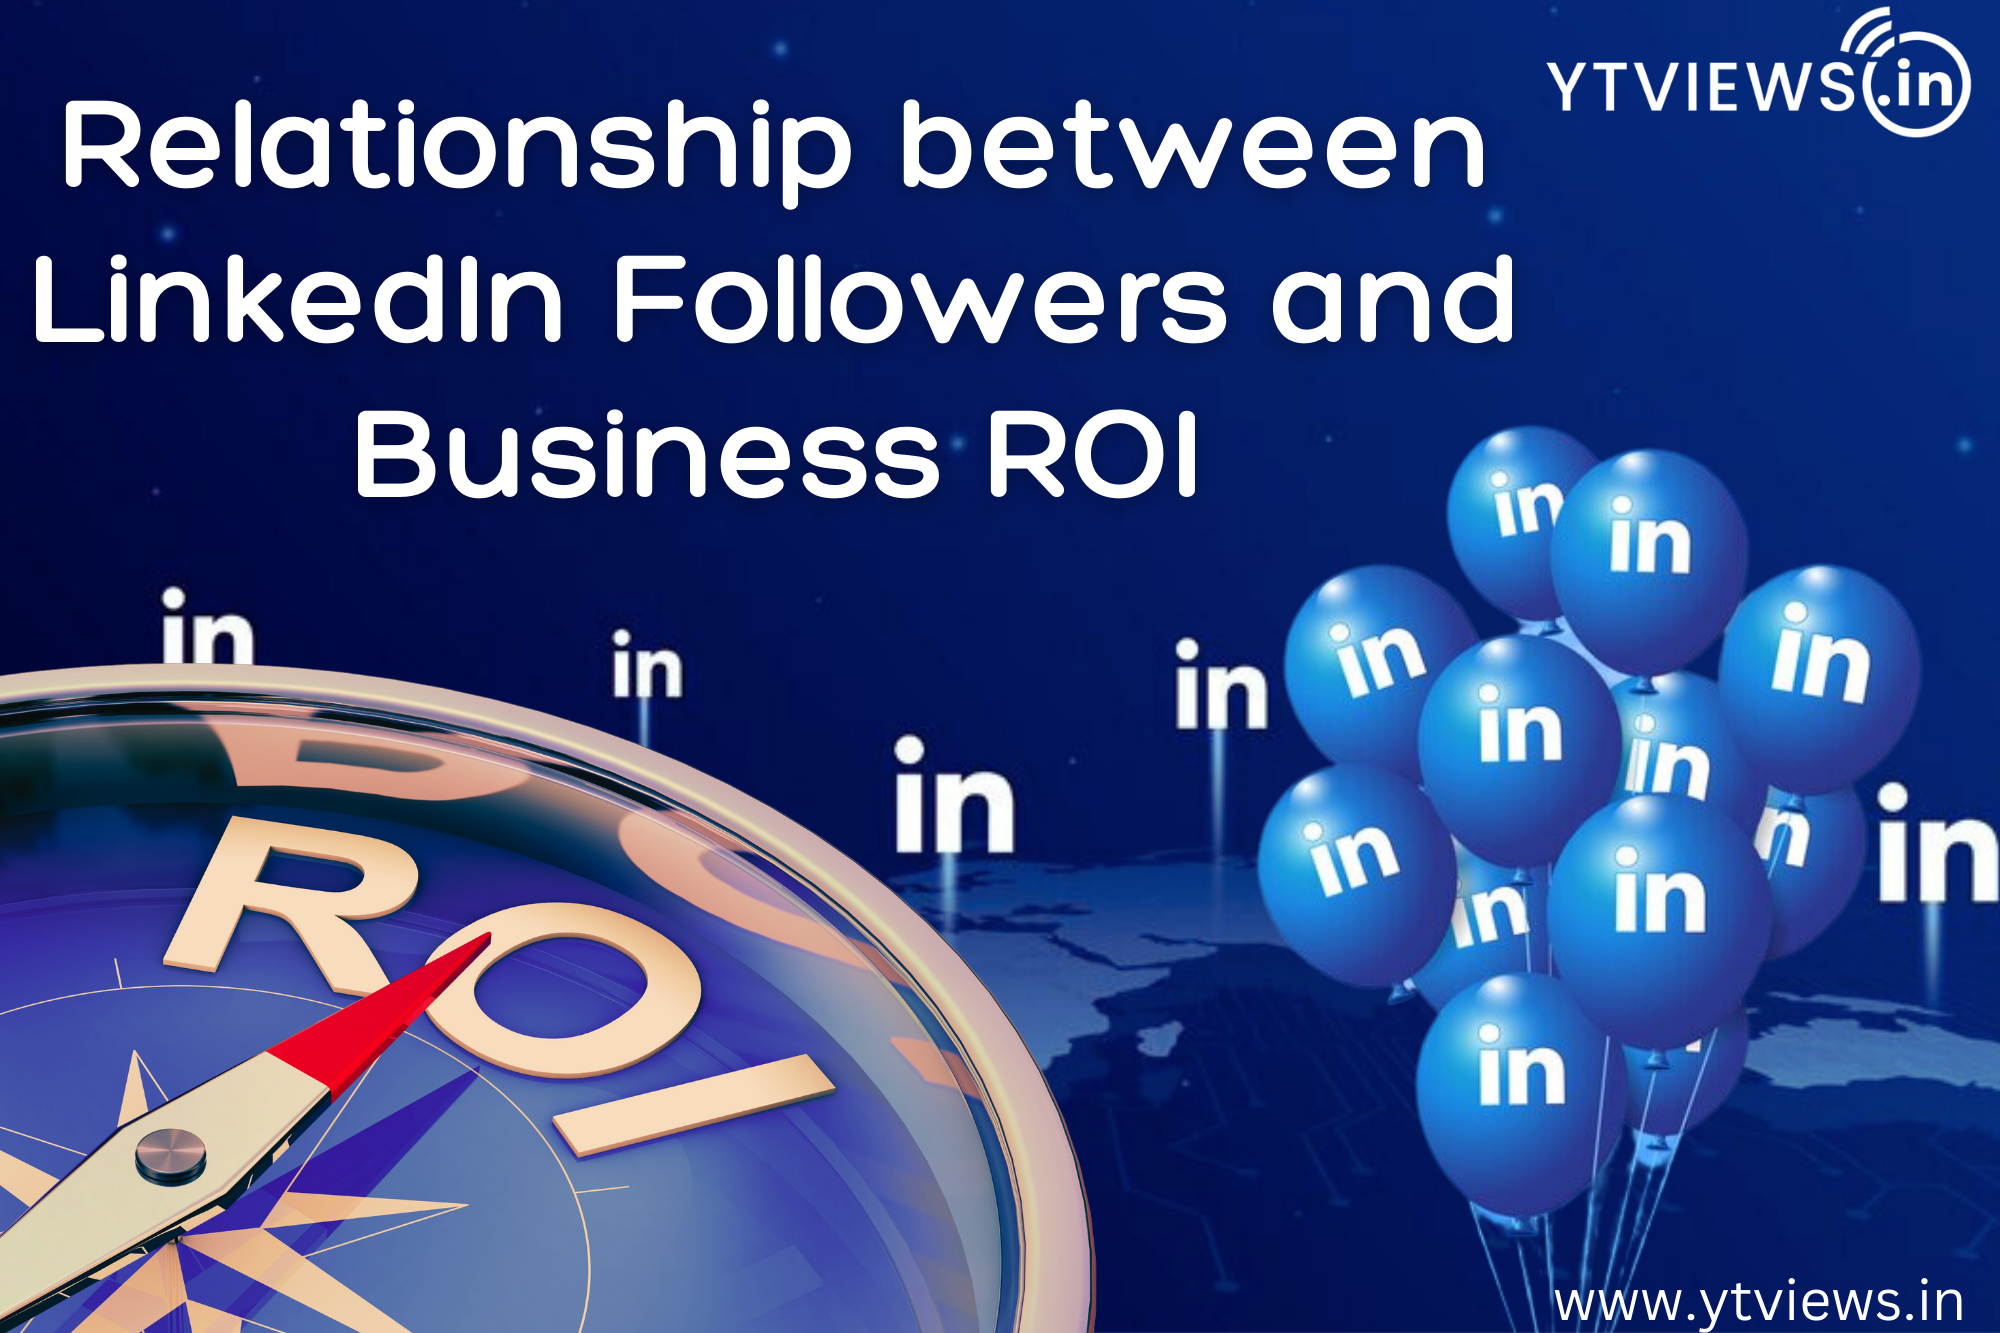 Understanding the relationship between LinkedIn followers and business ROI